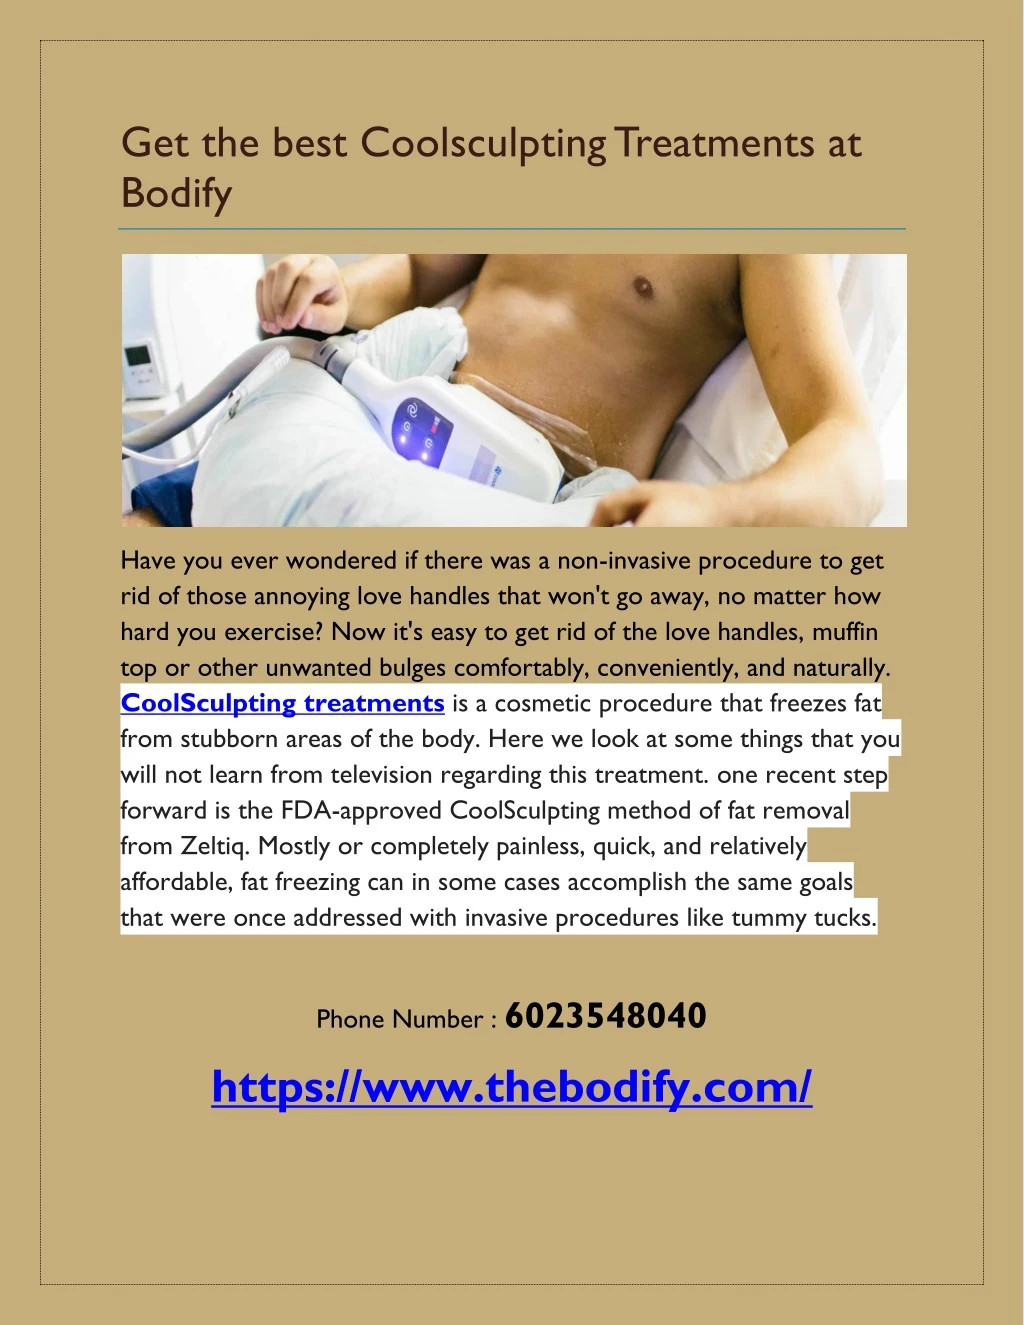 get the best coolsculpting treatments at bodify